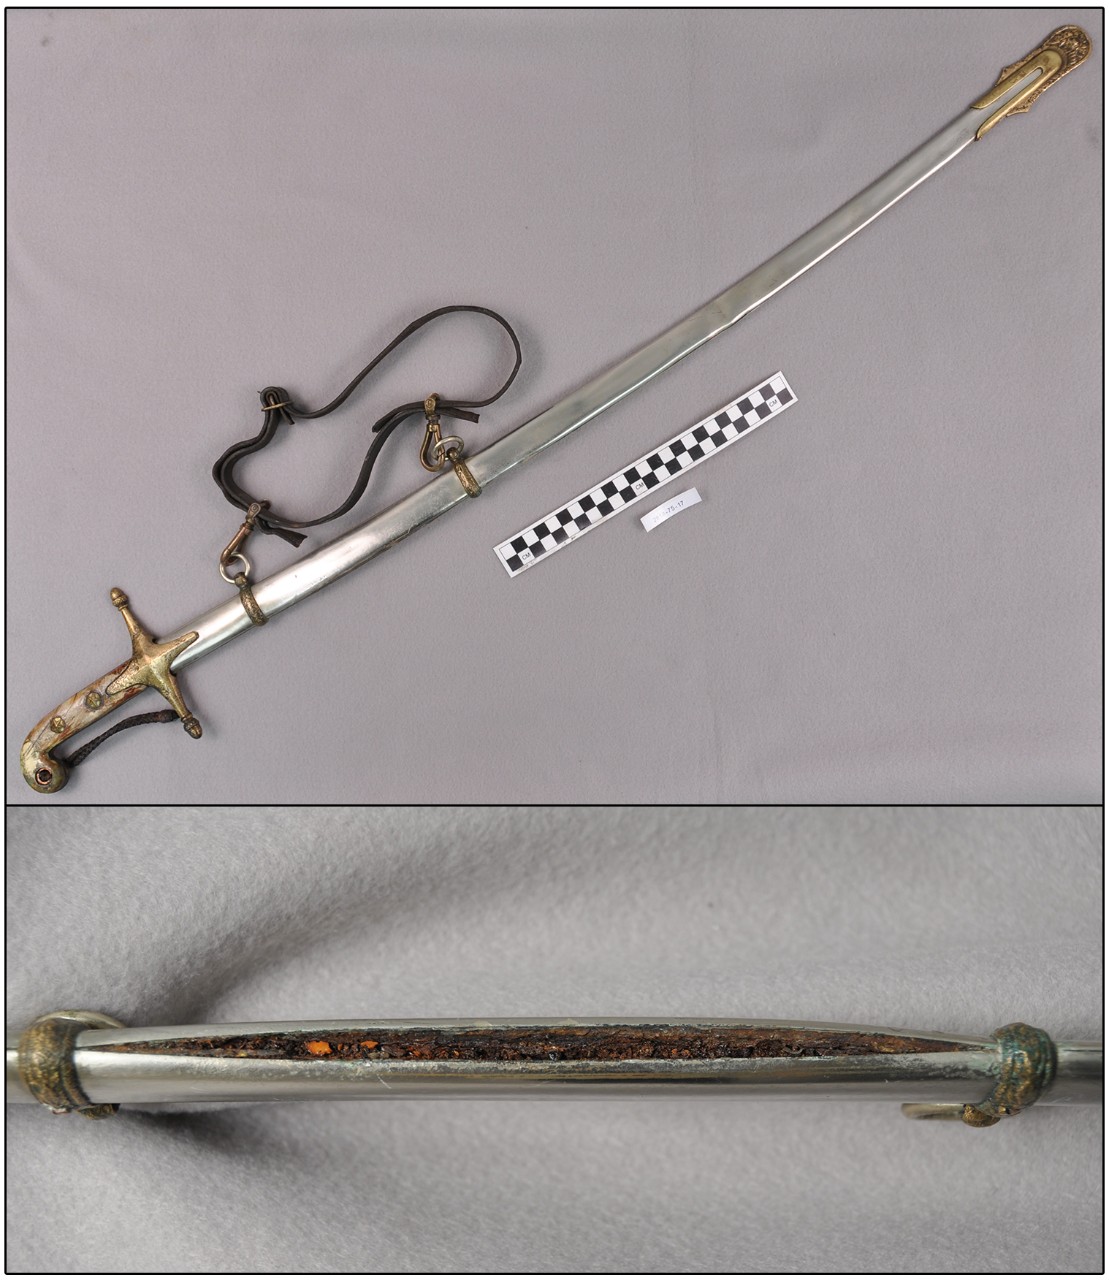 Two color photos of a sword. The top image is the complete sword with a sheath covering the blade and a leather strap attached. The bottom is a close up of a crack in the sheath showing the corroded blade, which is orange and red in color and flaking.